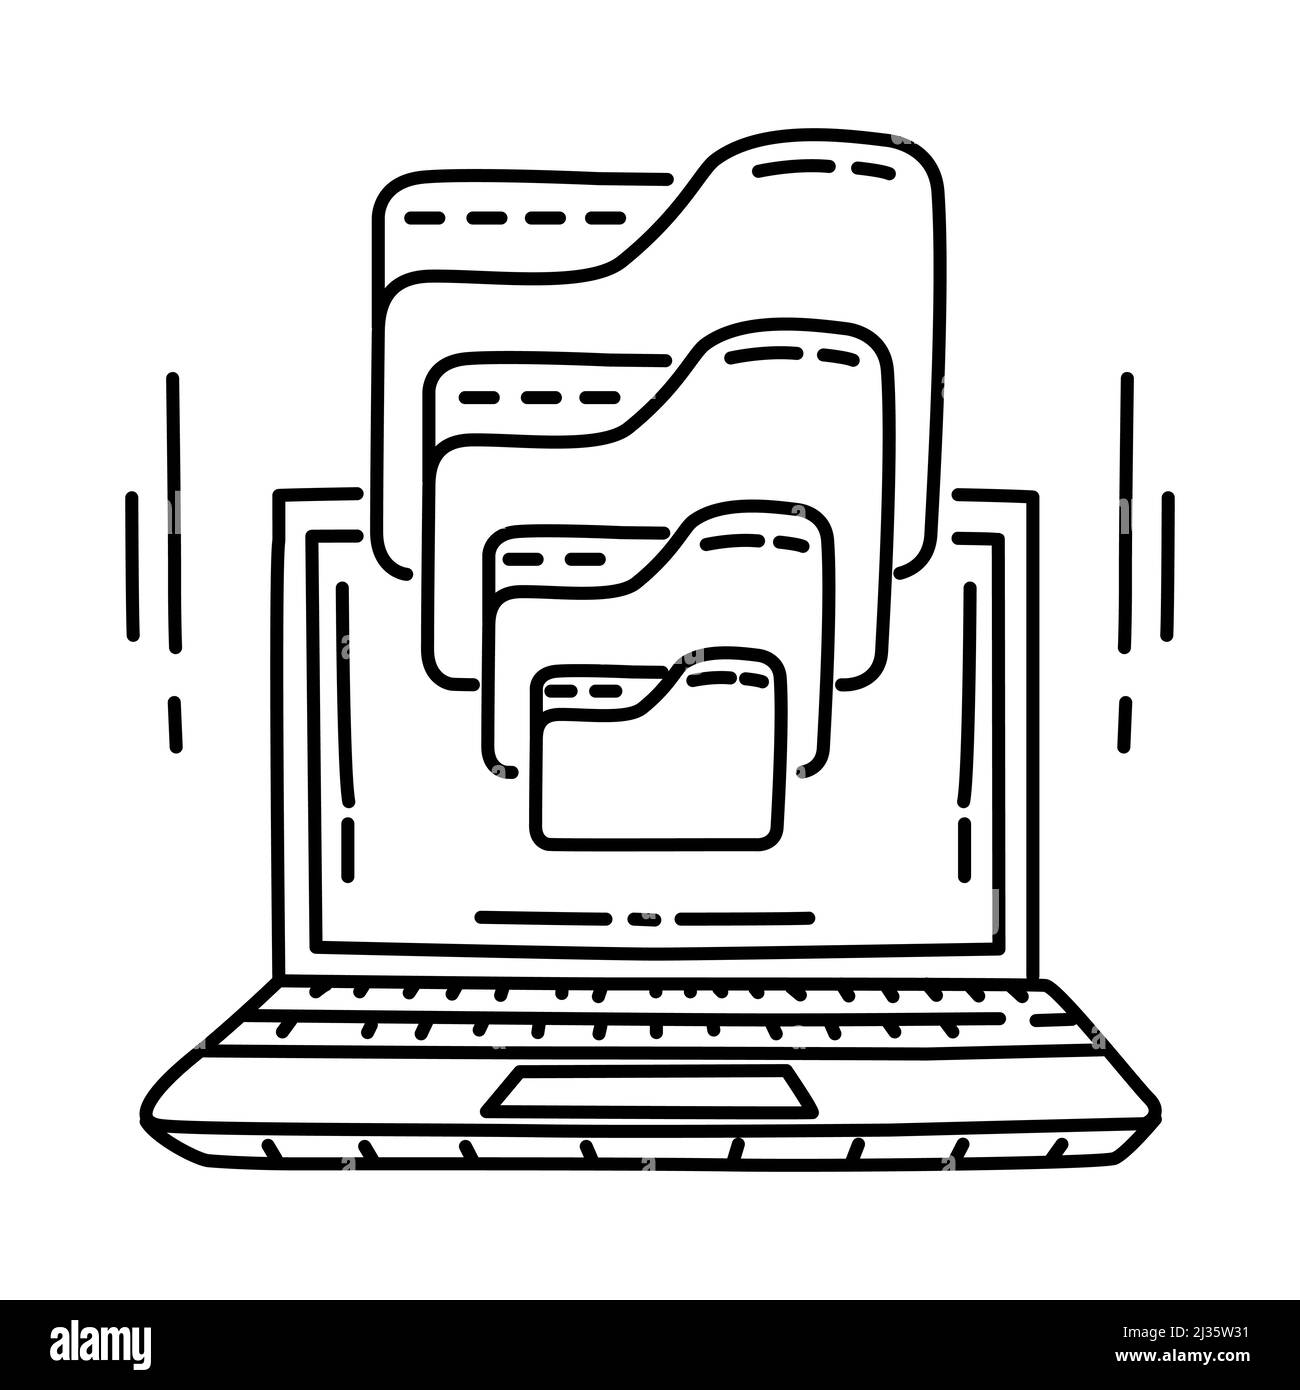 File Explorer Part of Computer Software and Hardware Hand Drawn Icon Set Vector. Stock Vector